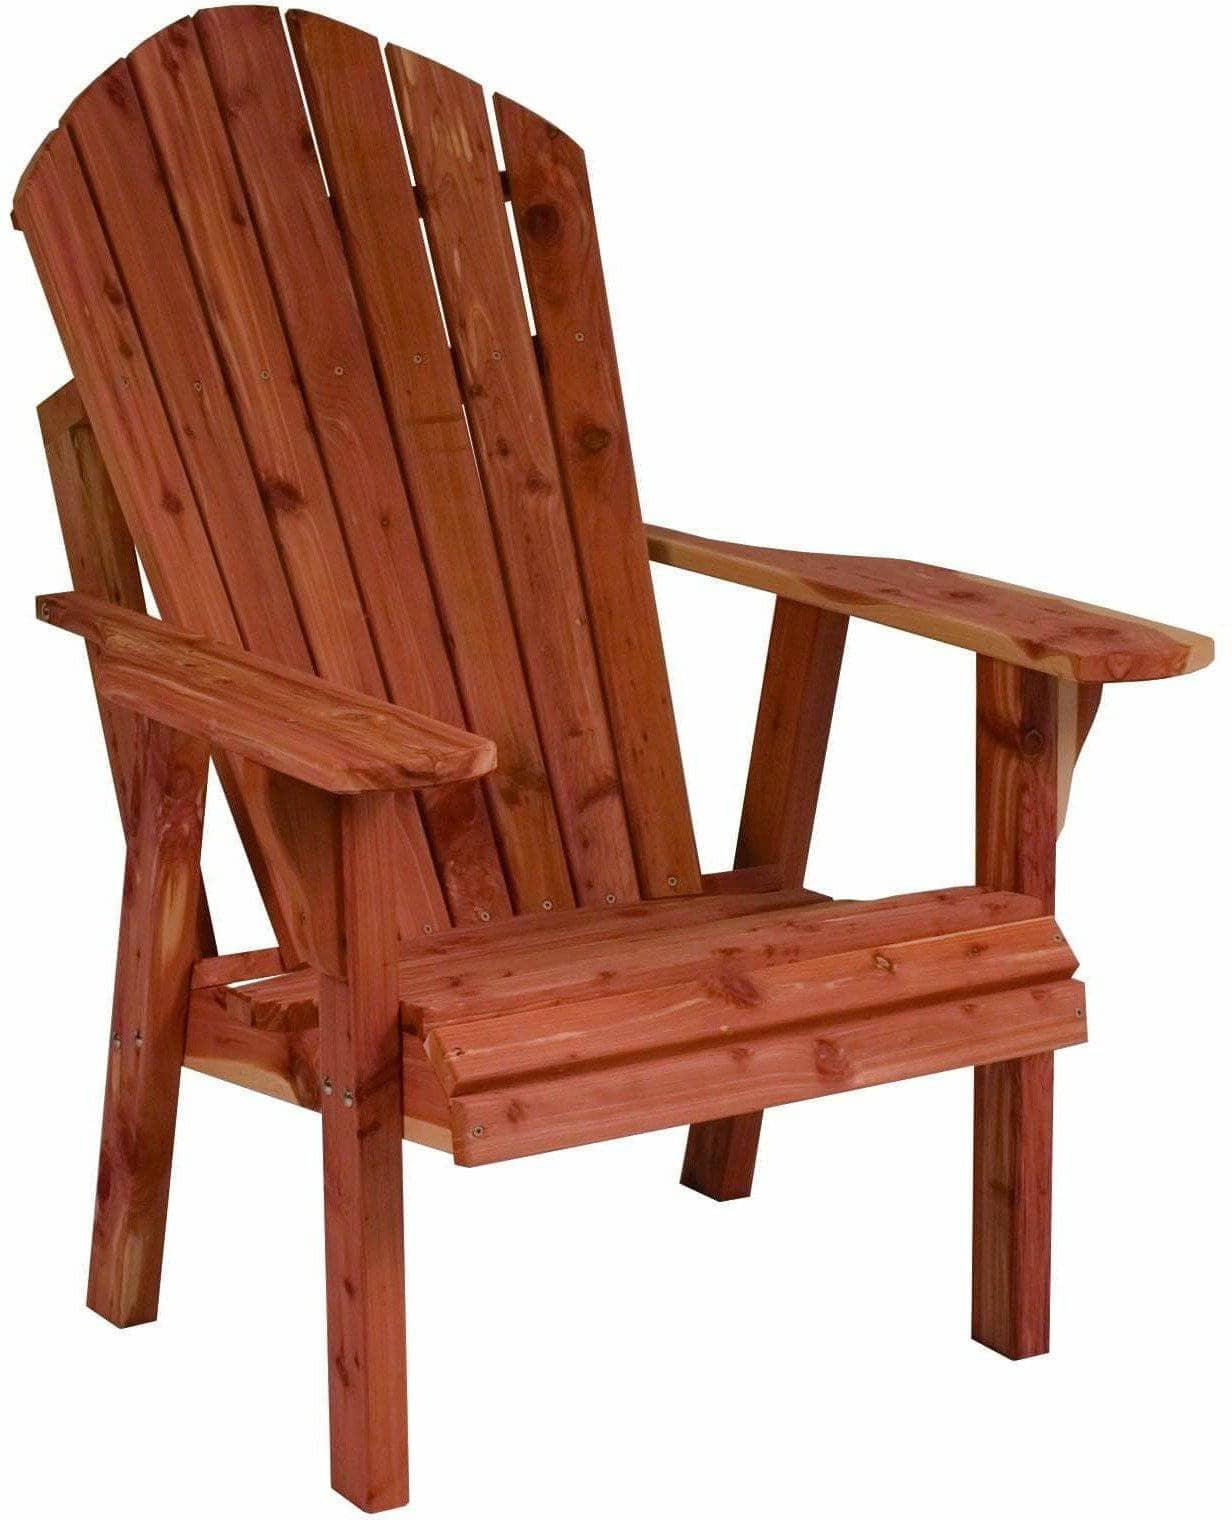 Nature’s Lawn & Patio 34" Wood Adirondack Chair-Rustic Furniture Marketplace